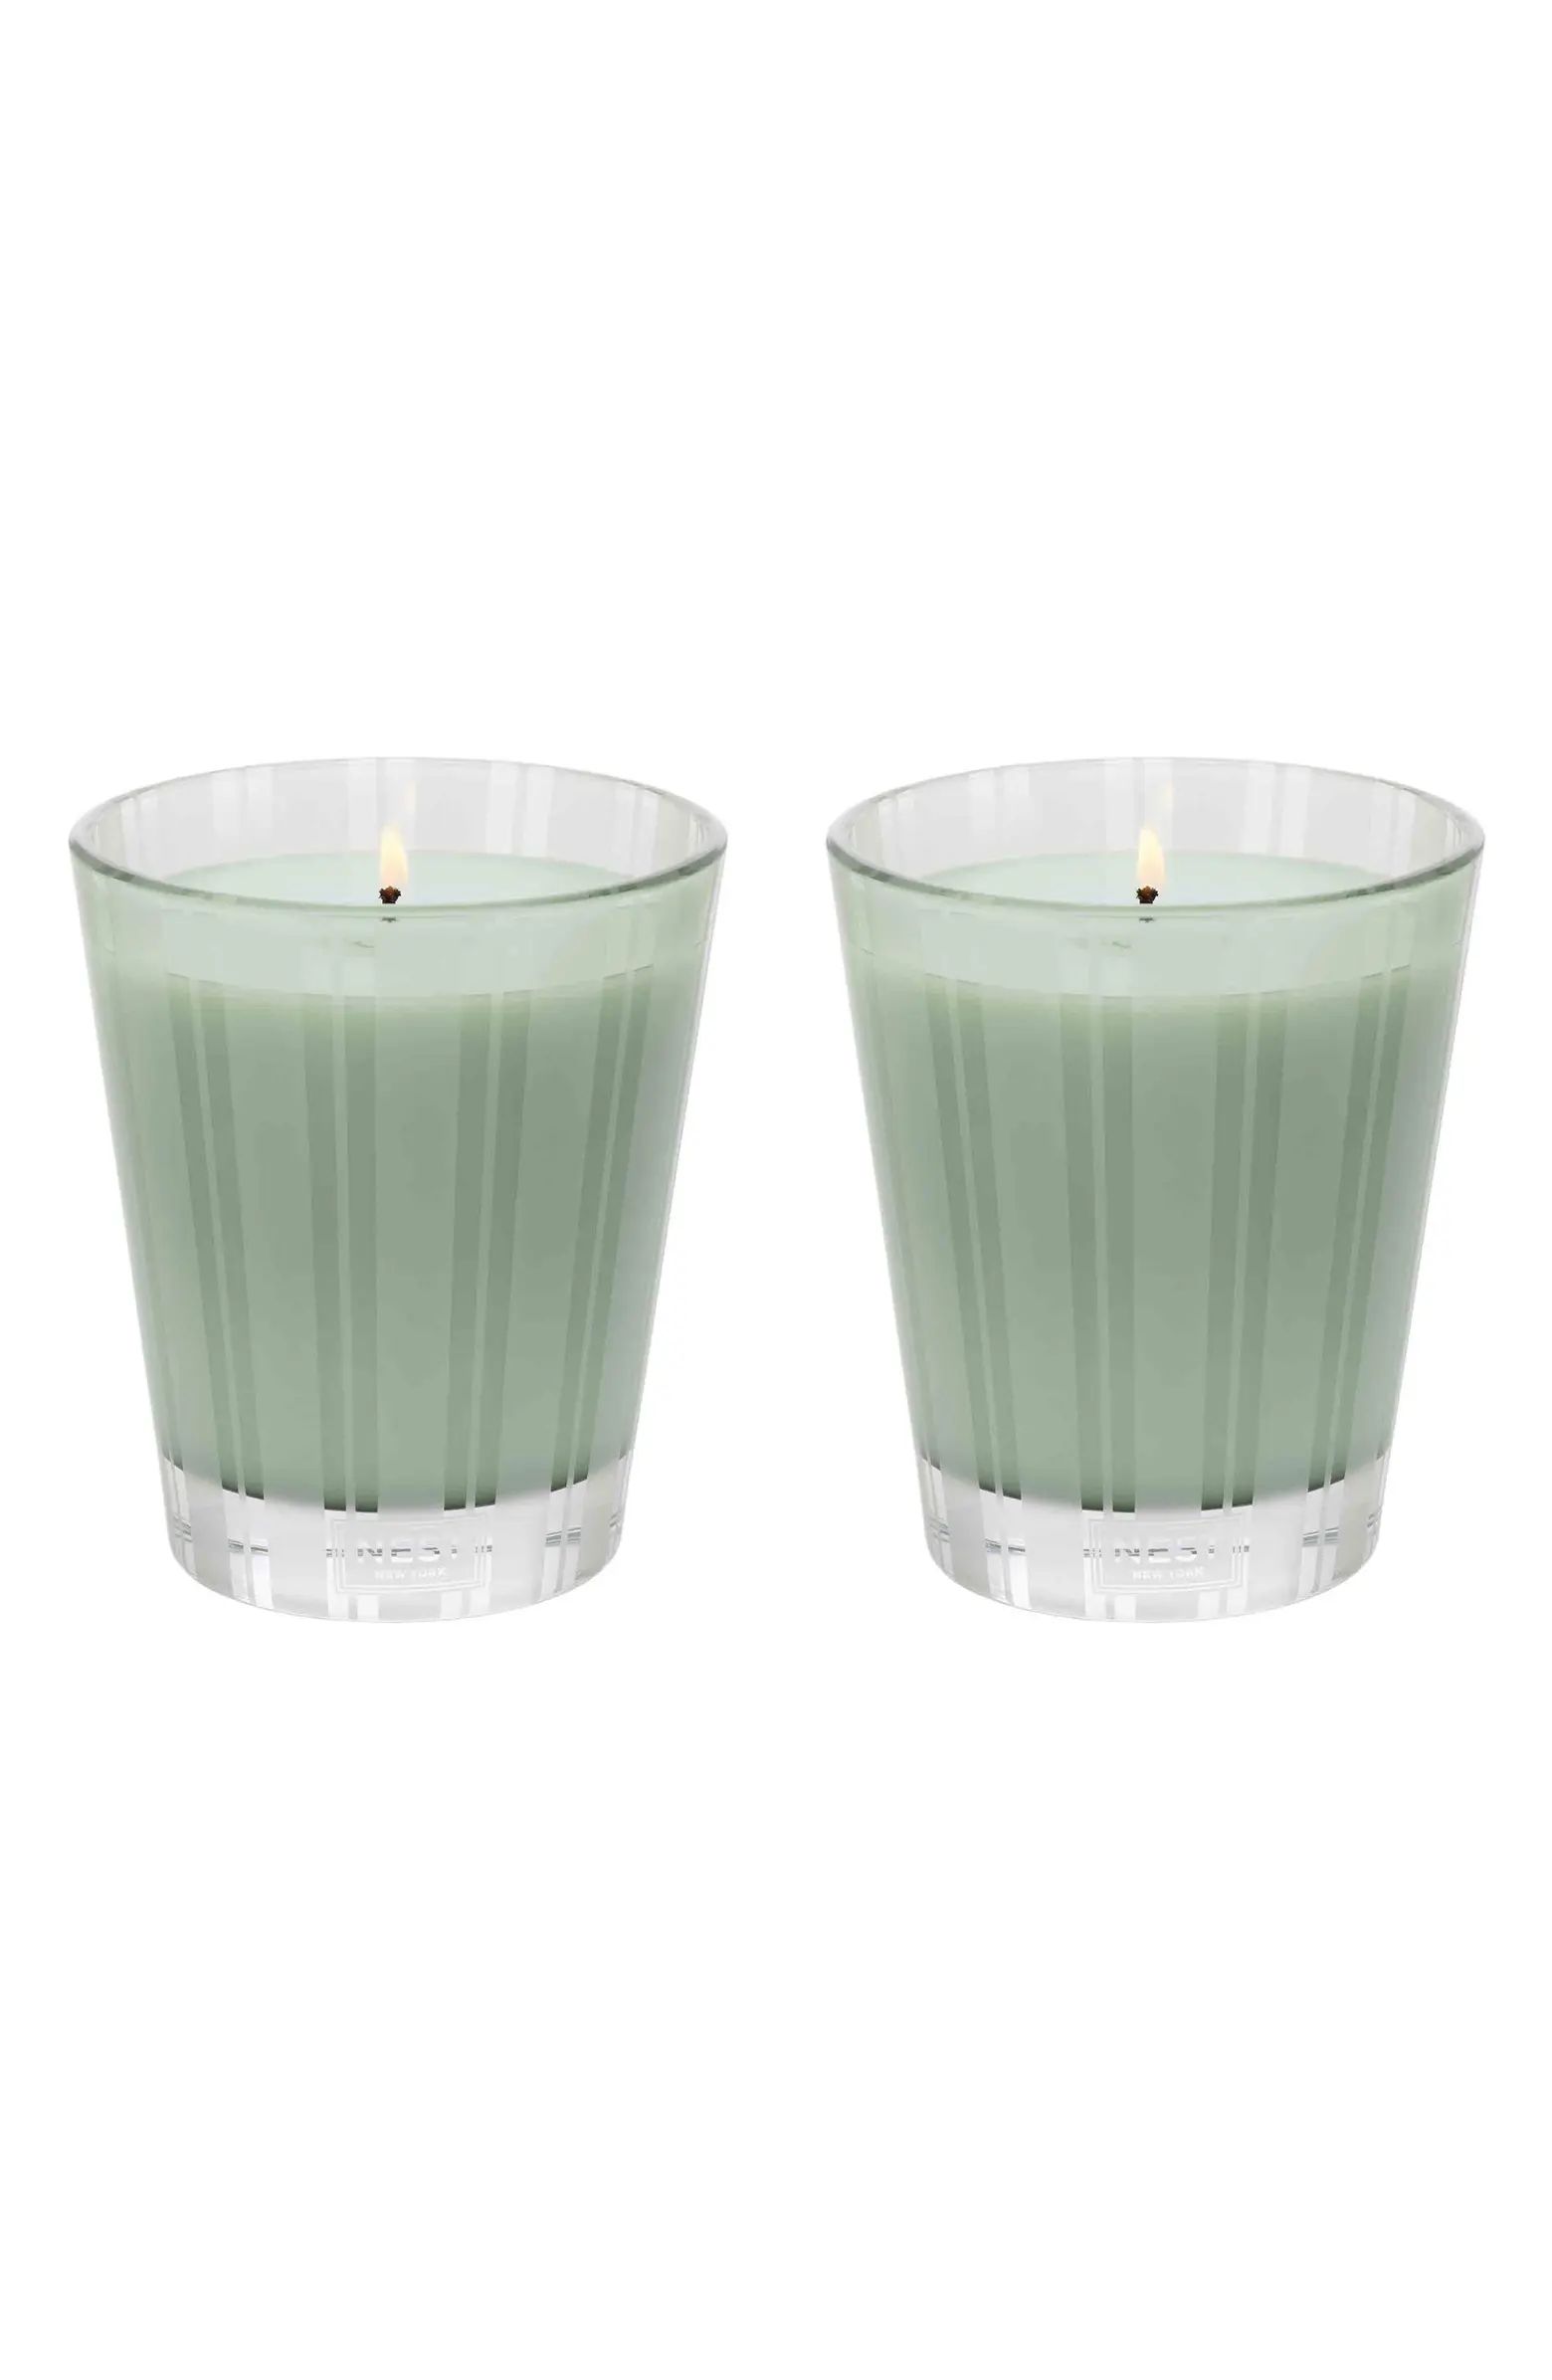 NEST New York Wild Mint & Eucalyptus Candle Duo $92 Value | Nordstrom | Nordstrom